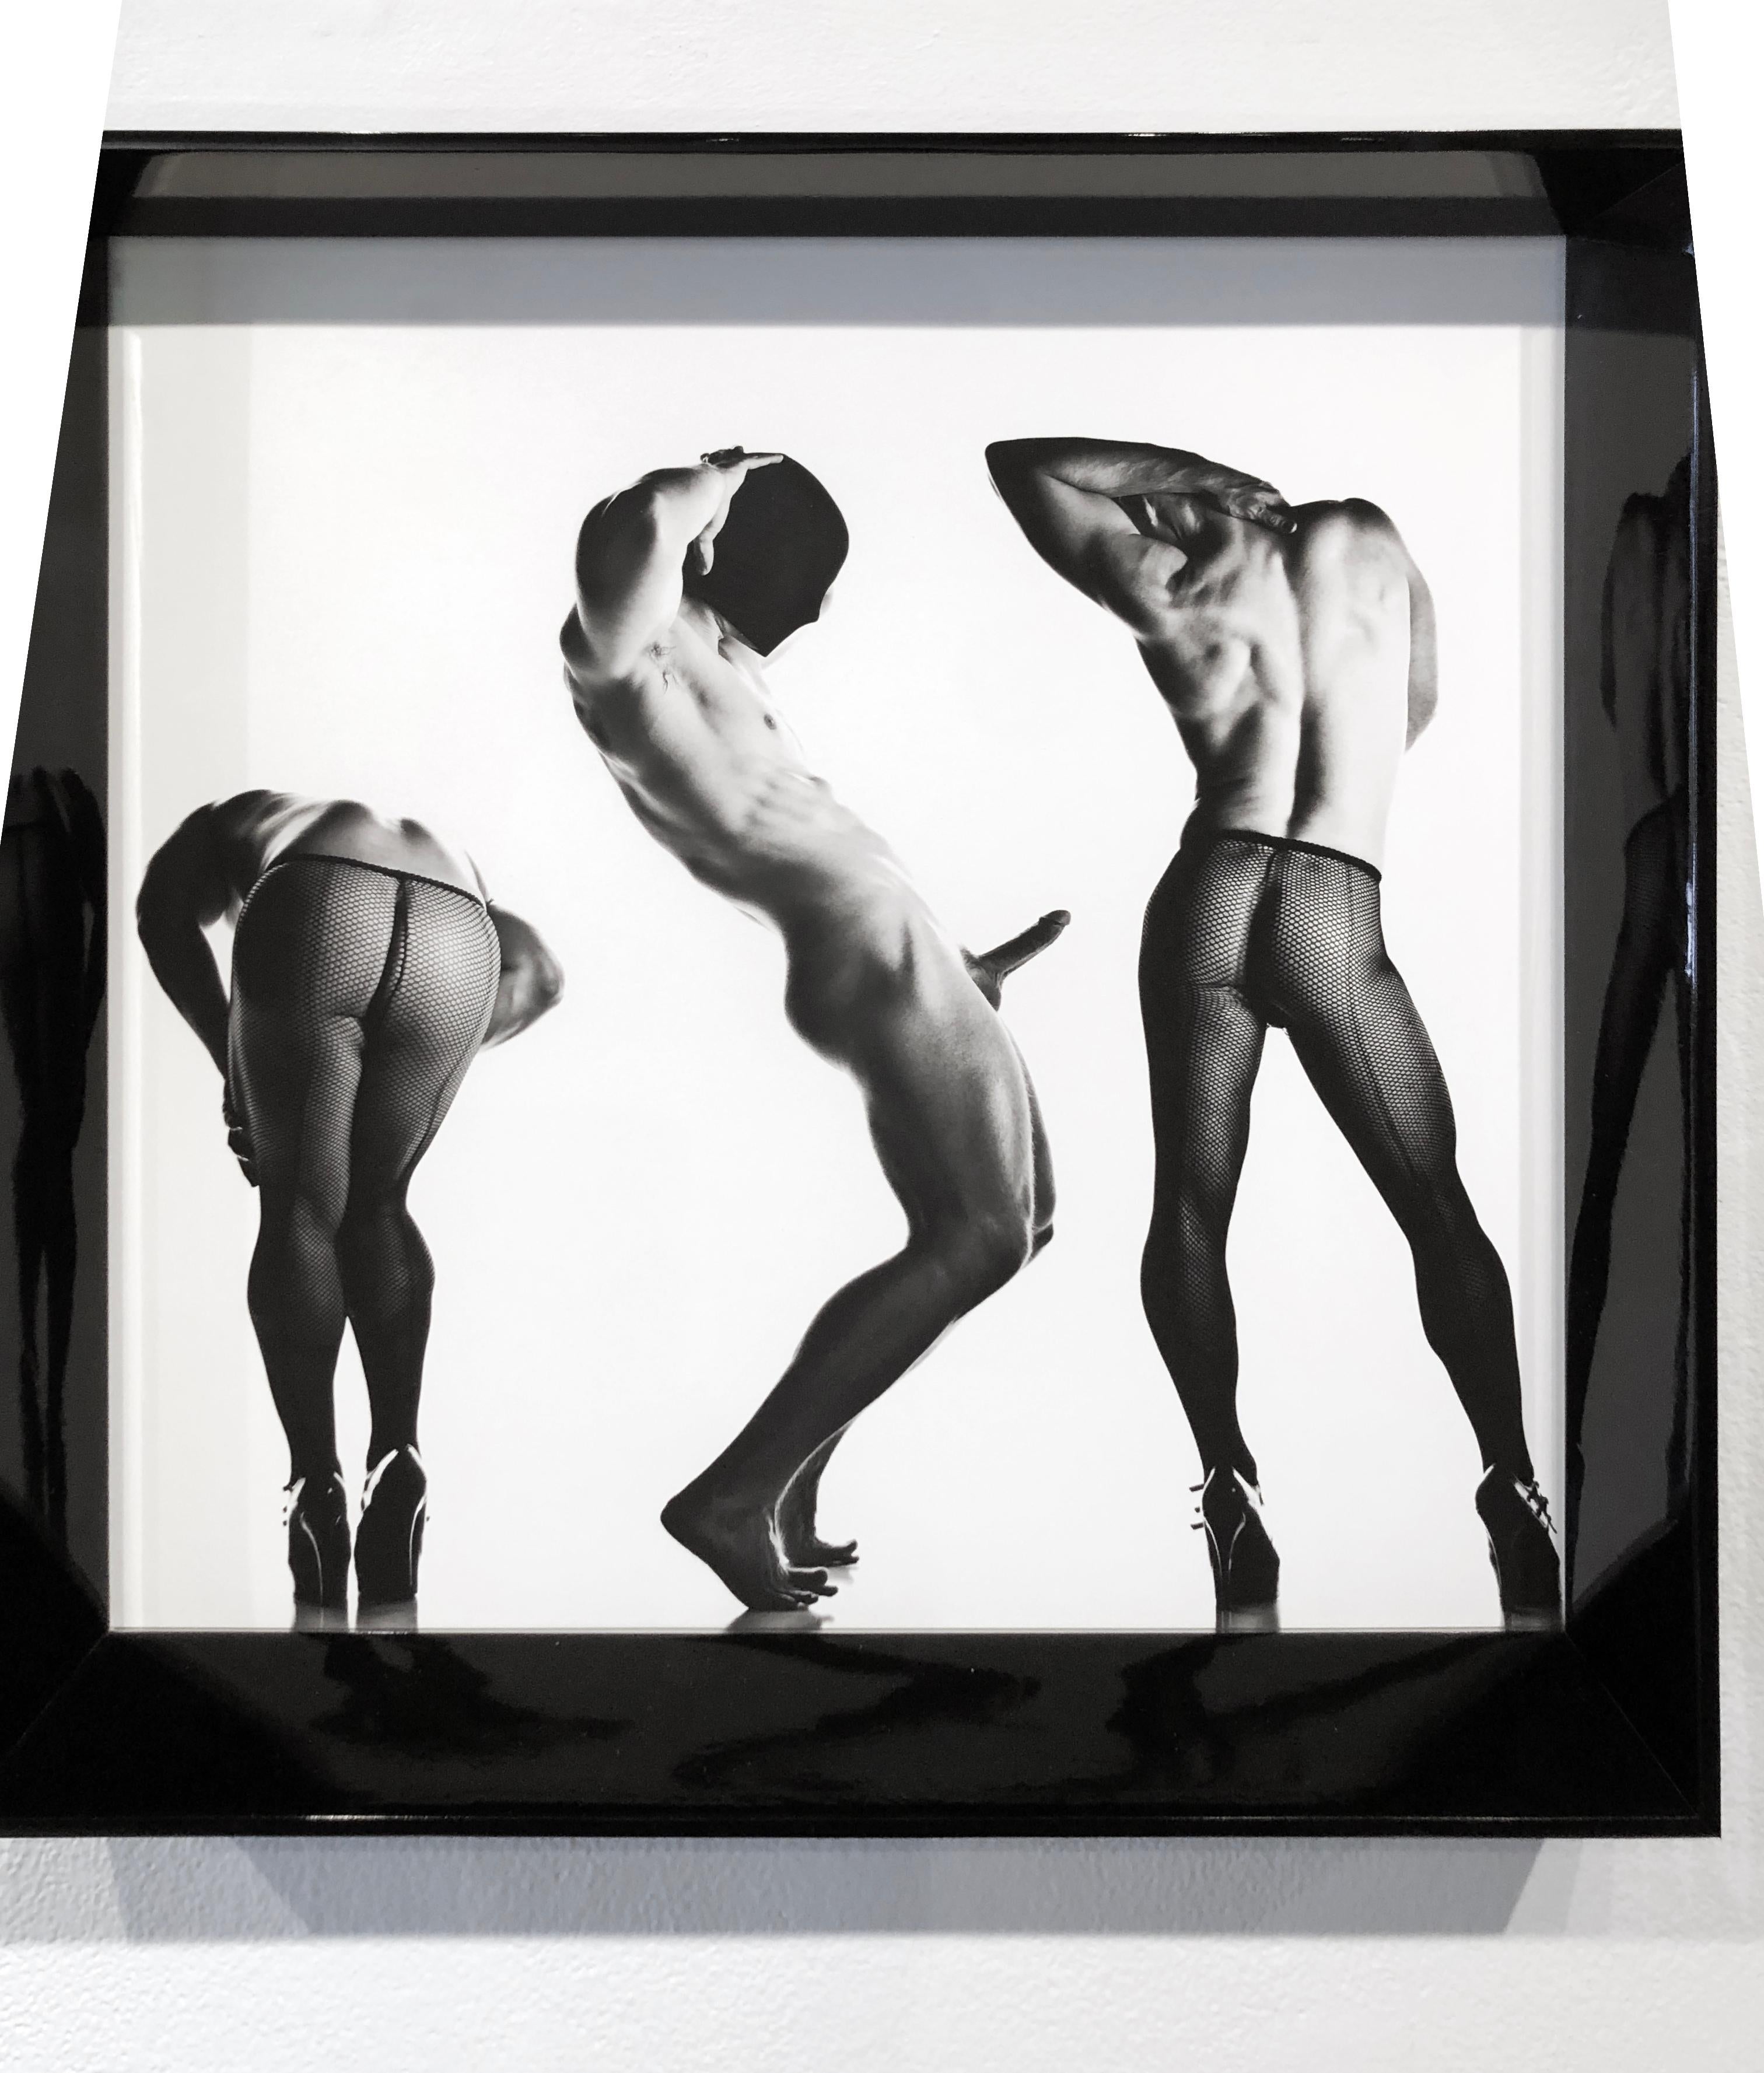 This is a triple portrait of a muscular male in three different poses and dressed only in fishnet stockings and stiletto heels.  The model is dramatically lit and poses seductively for the camera.  His arousing contortions of the body appear to